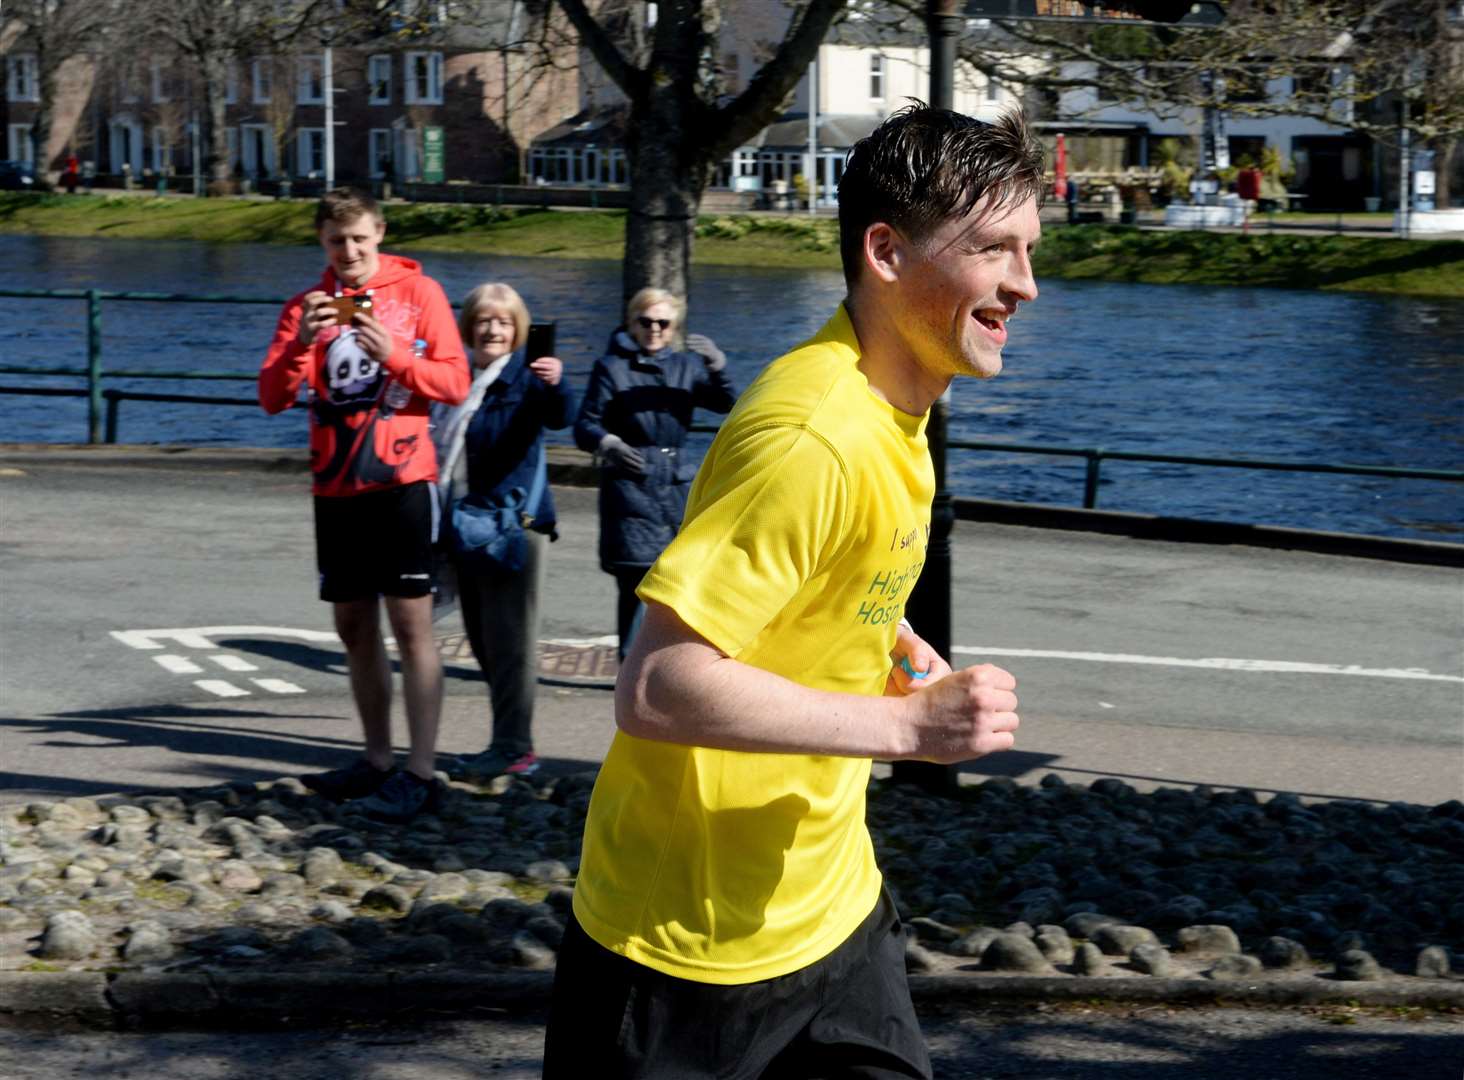 Connor Golabek receives applause as he comes up to the Highland Hospice building on the final stretch. Picture: James Mackenzie.